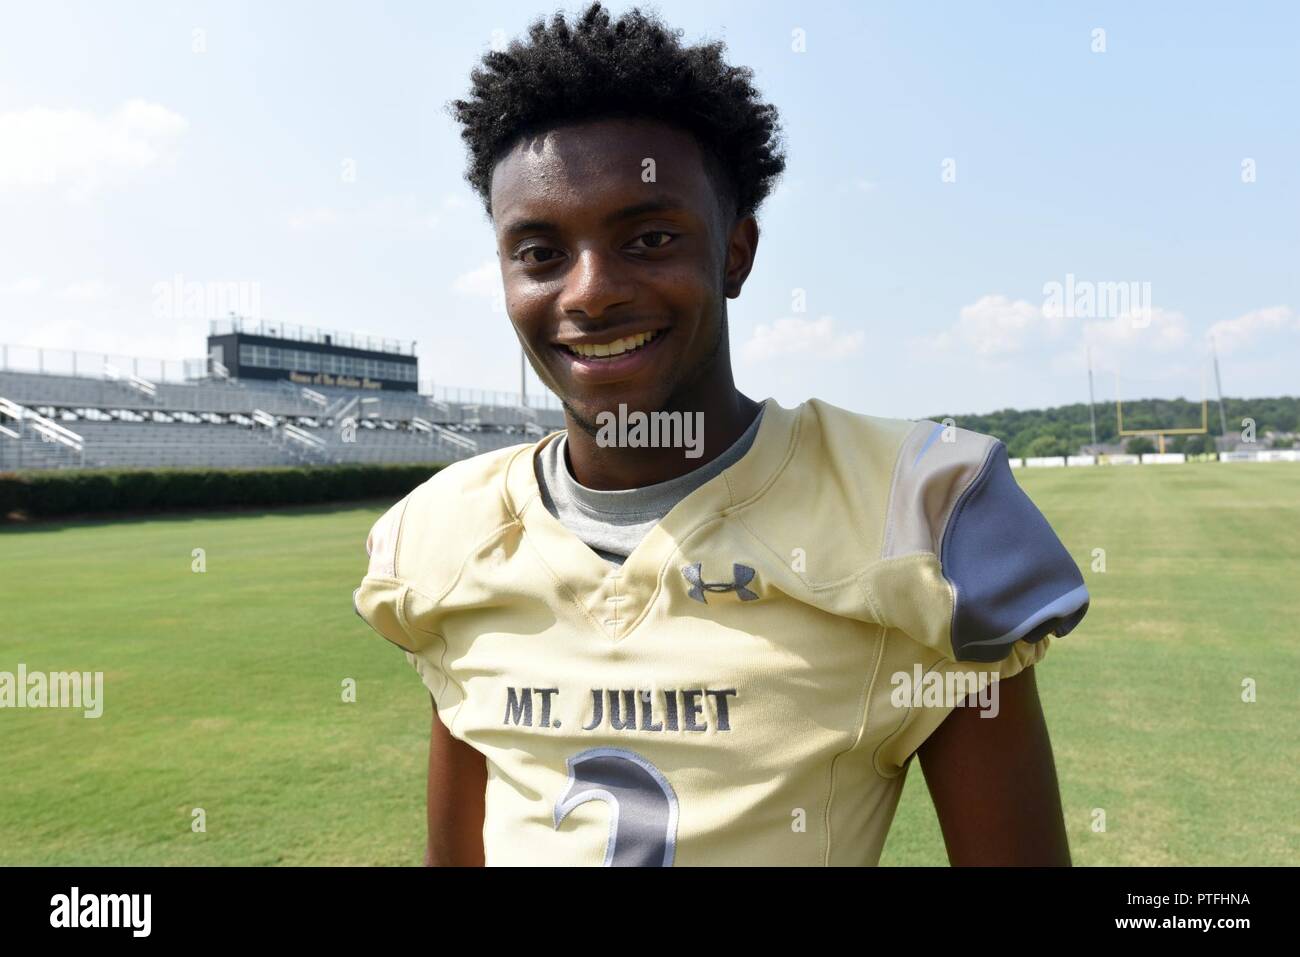 Jalan Sowell, star running back at Mt. Juliet High School, shared his story and comeback narrative of never giving up on ESPN's 'Make A Wish' series at the Golden Bears' stadium in Mt. Juliet, Tenn., July 21, 2017.  He produced and starred in the ESPN segment that aired July 20 where he shared how he overcame adversity when a life-threatening pulmonary condition kept him from playing football.  His father James Sowell is a safety officer with the U.S. Army Corps of Engineers Nashville District. Stock Photo